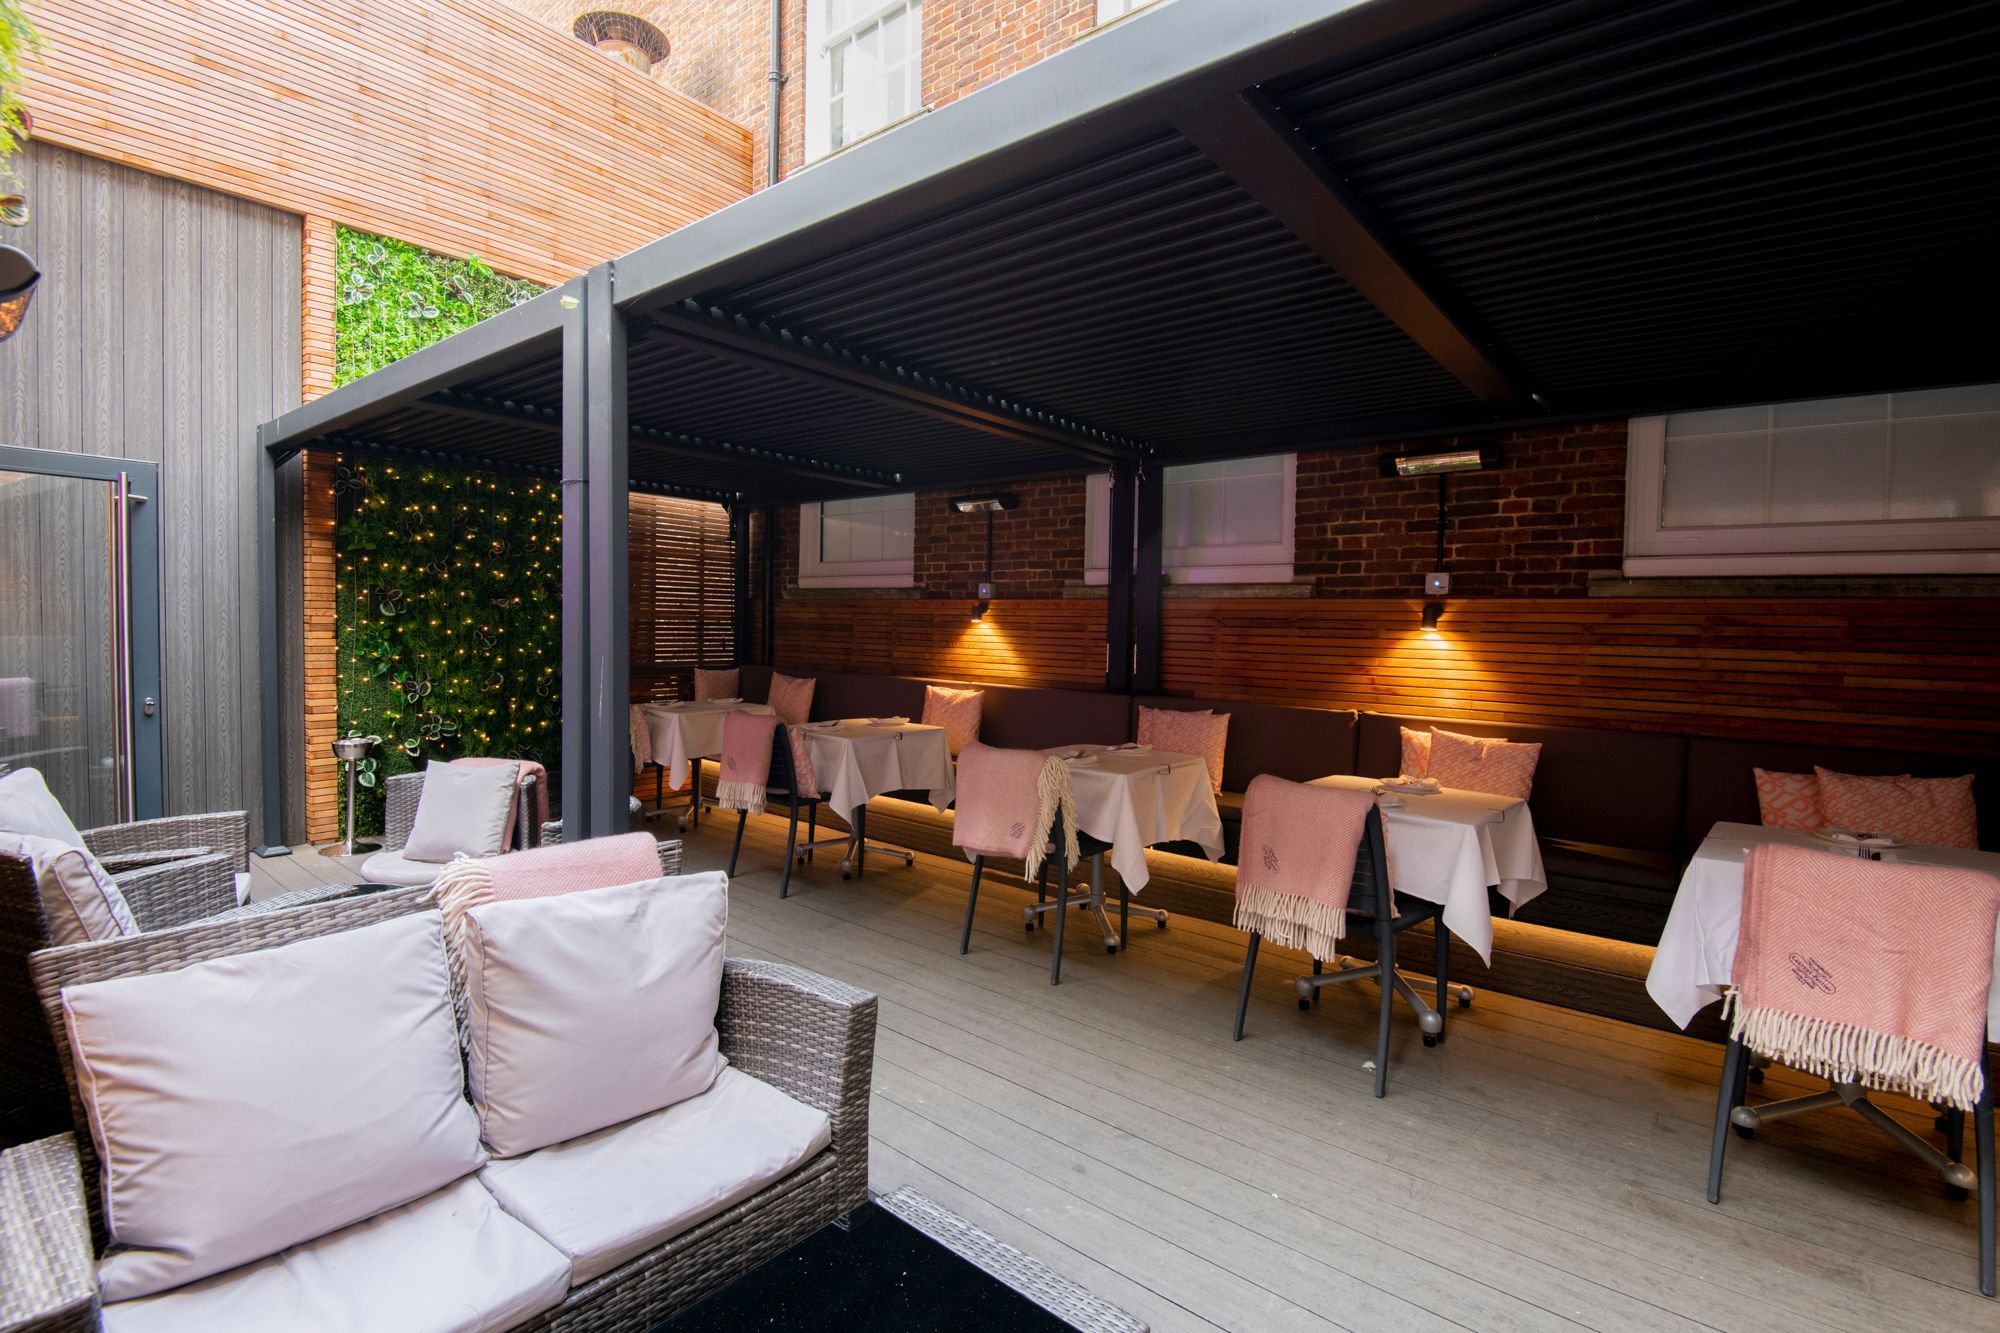 outdoor seating area with duvet covers on sofas and chairs